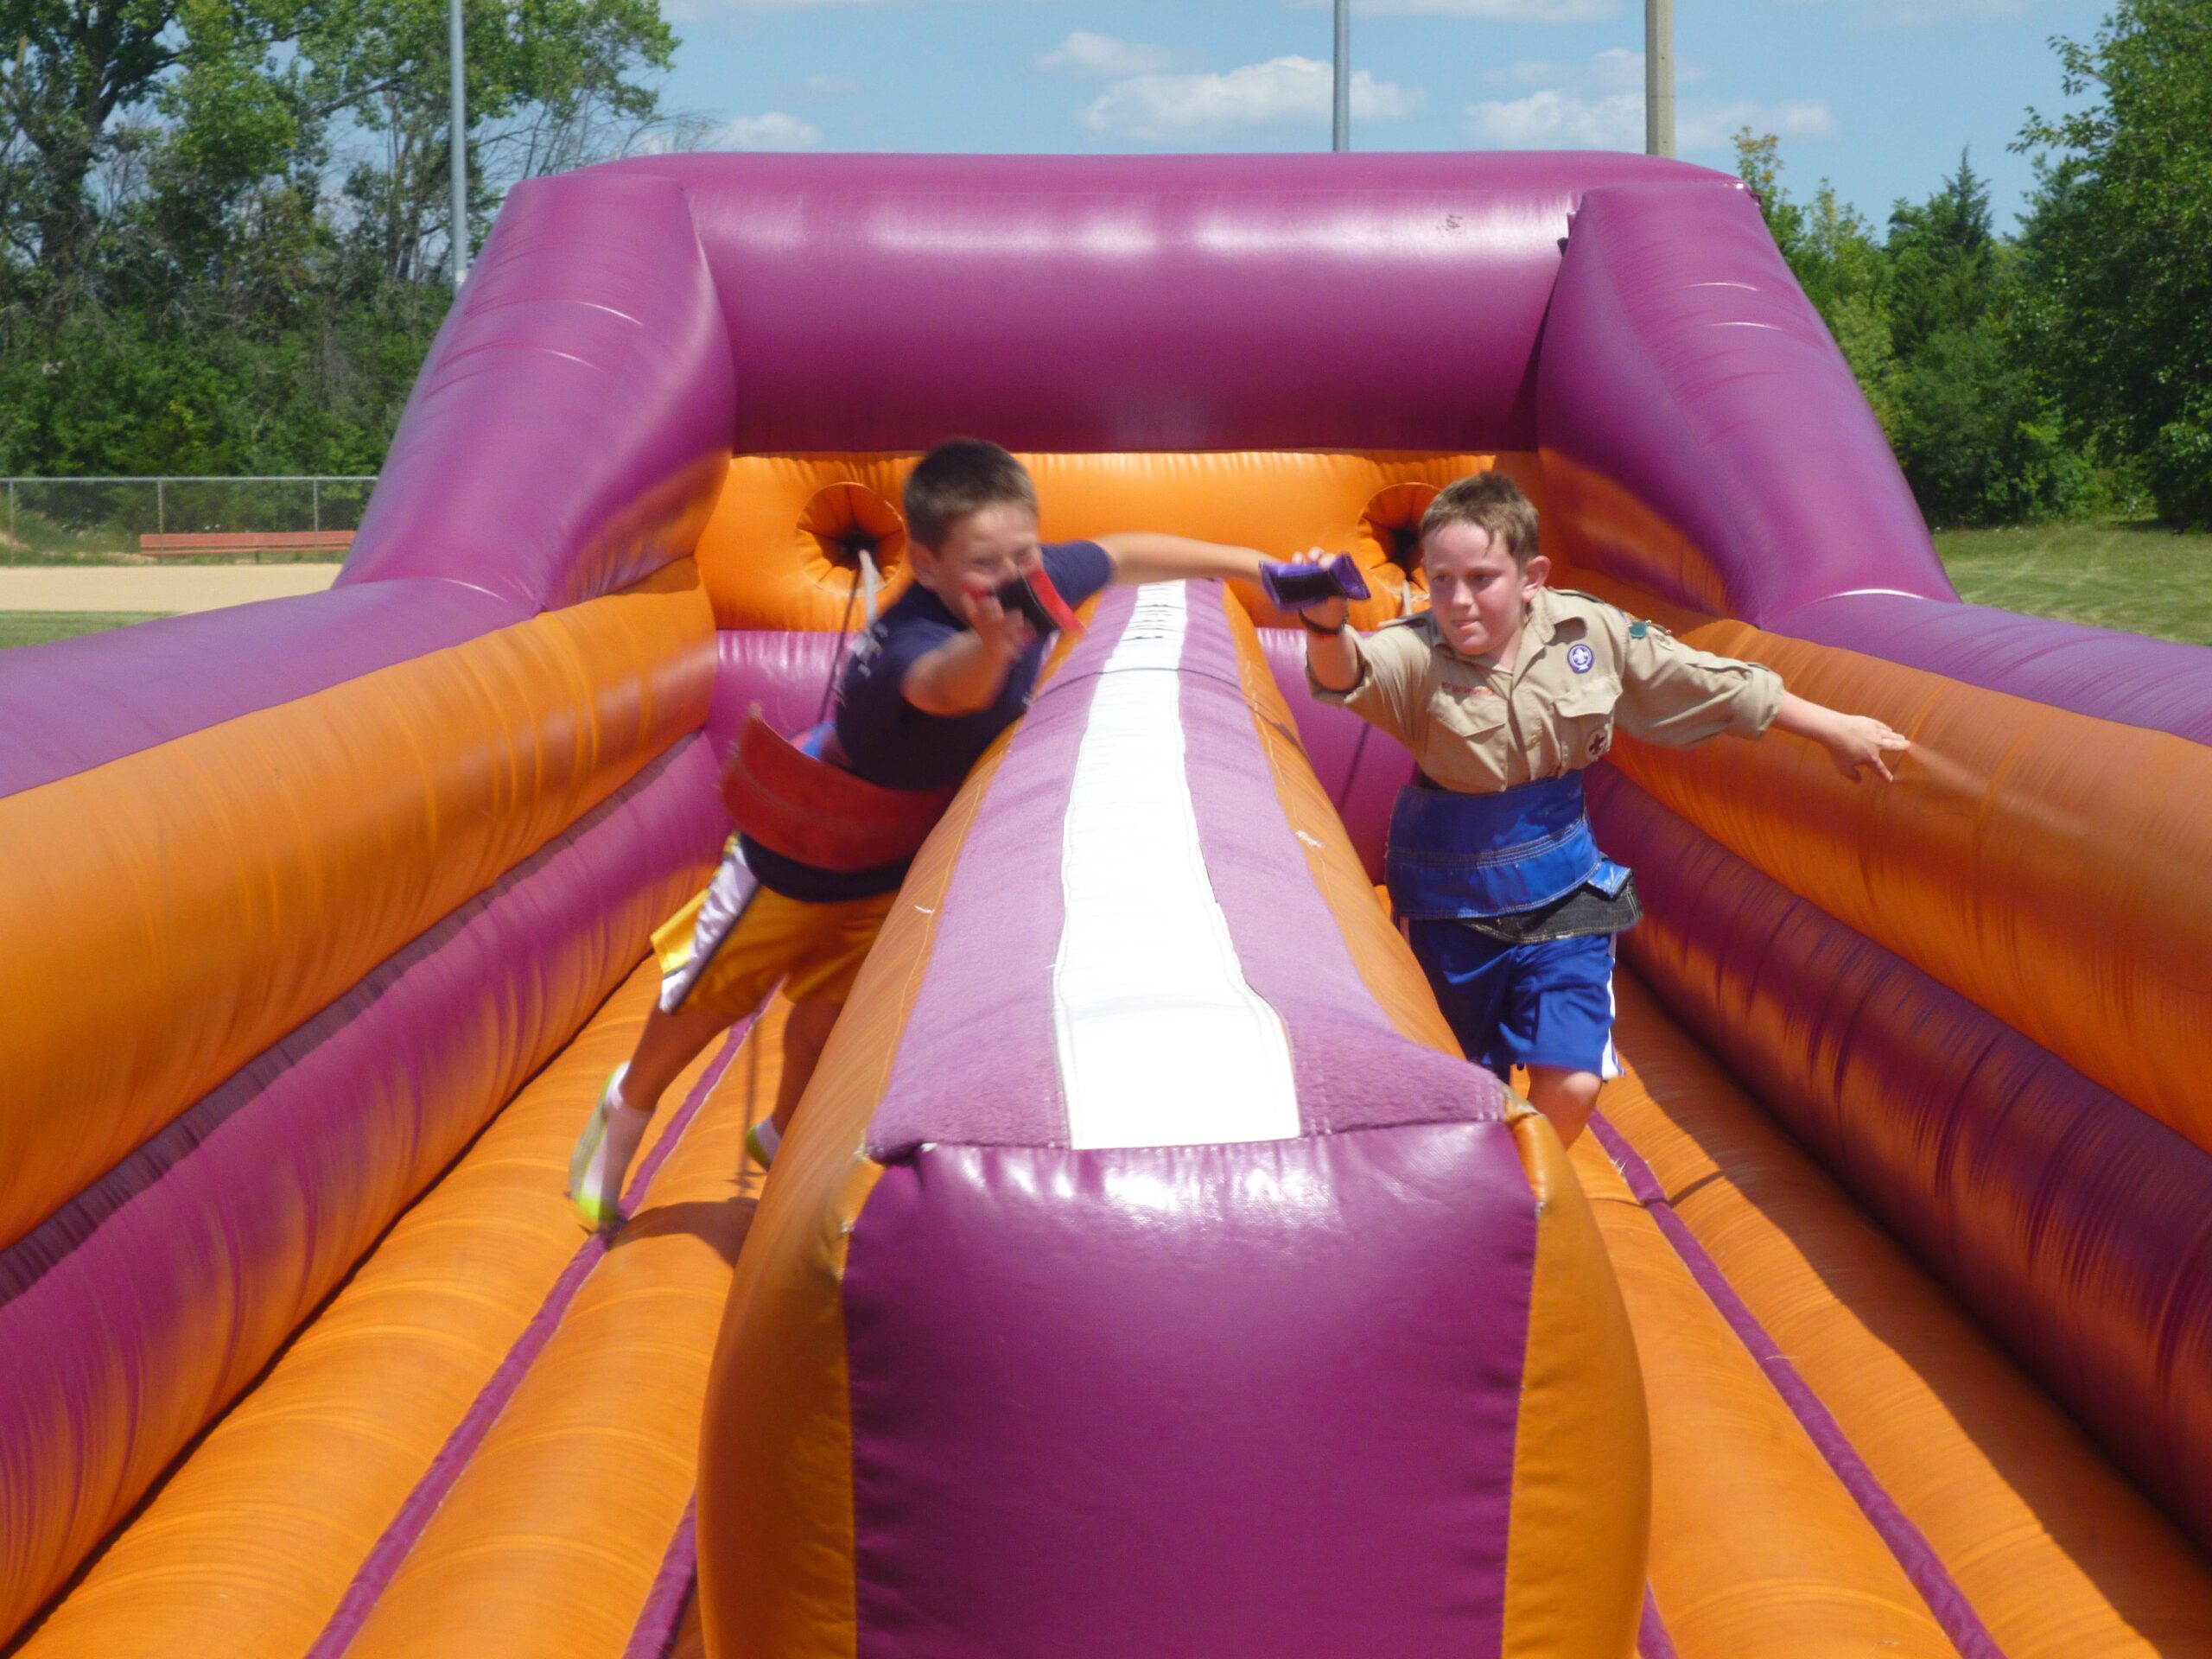 Two kids racing through an inflatable course